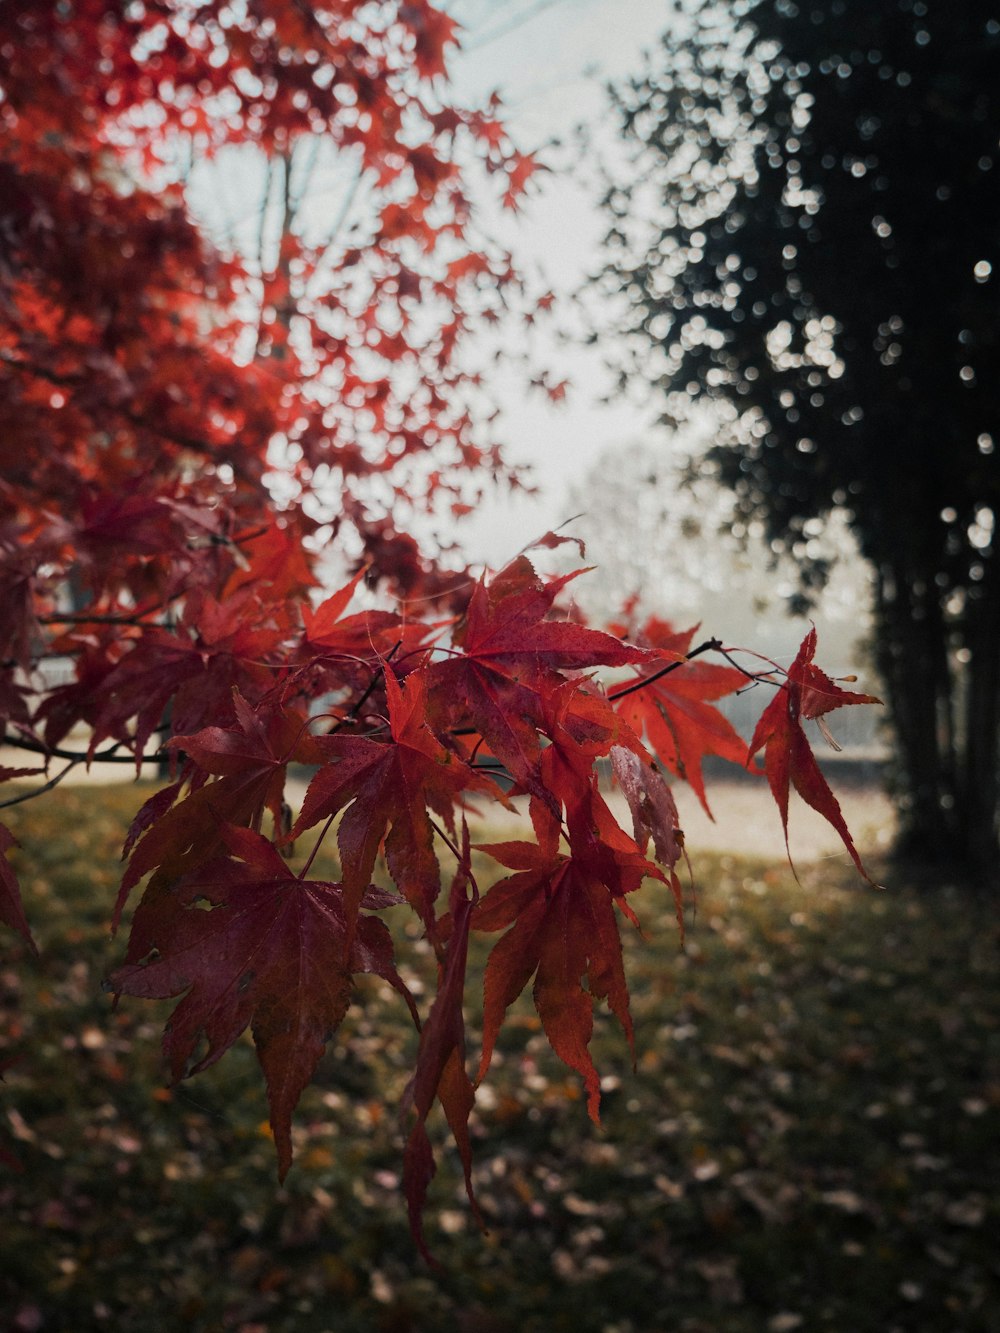 a tree with red leaves in a park